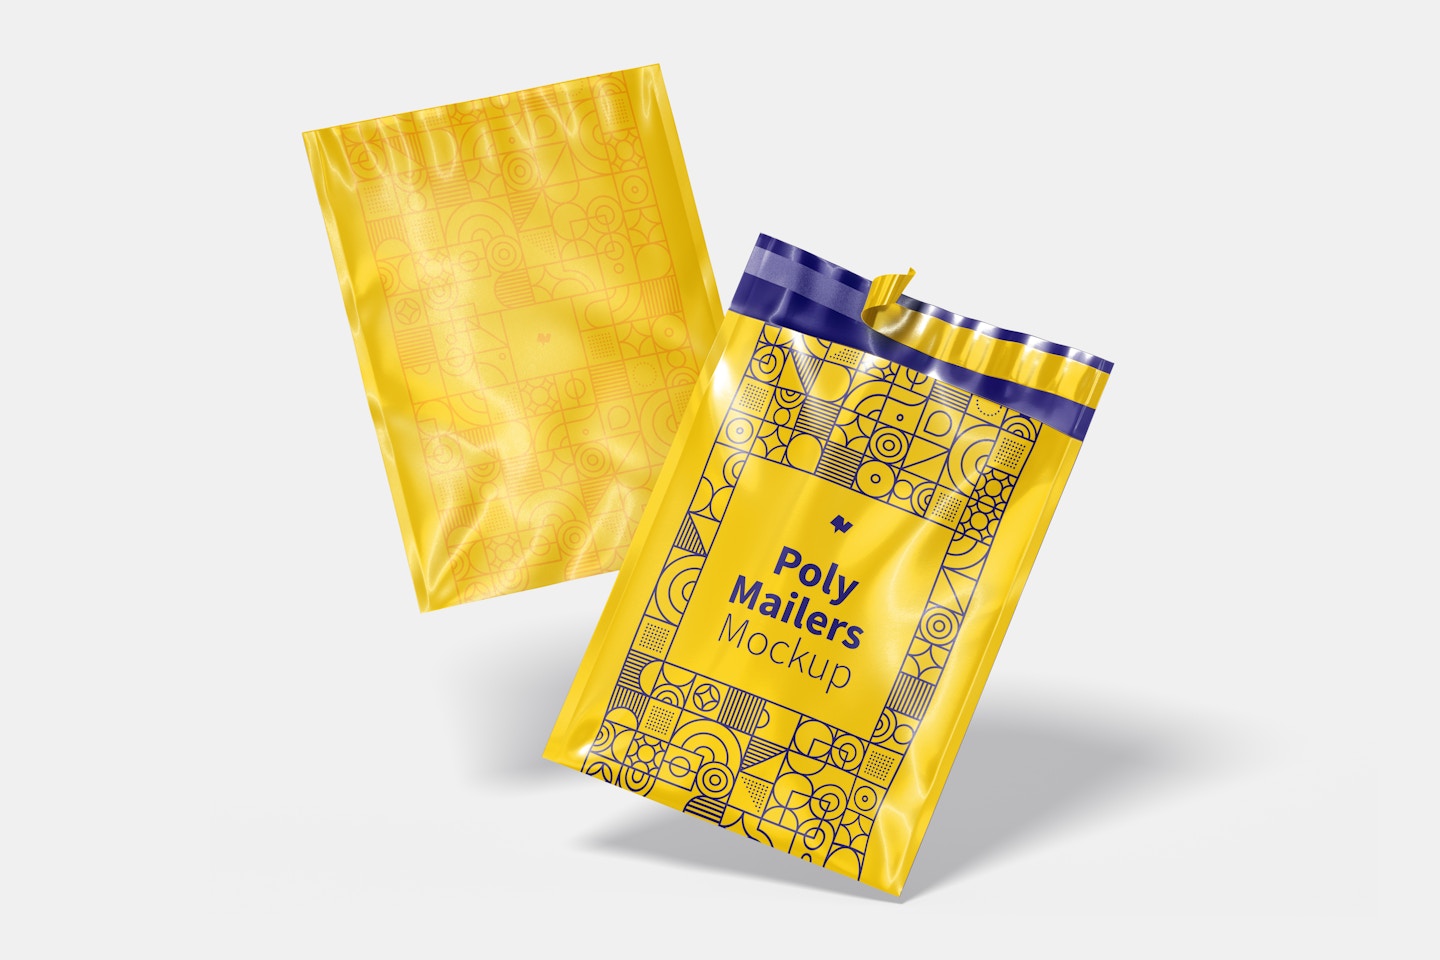 Poly Mailers Mockup, Falling